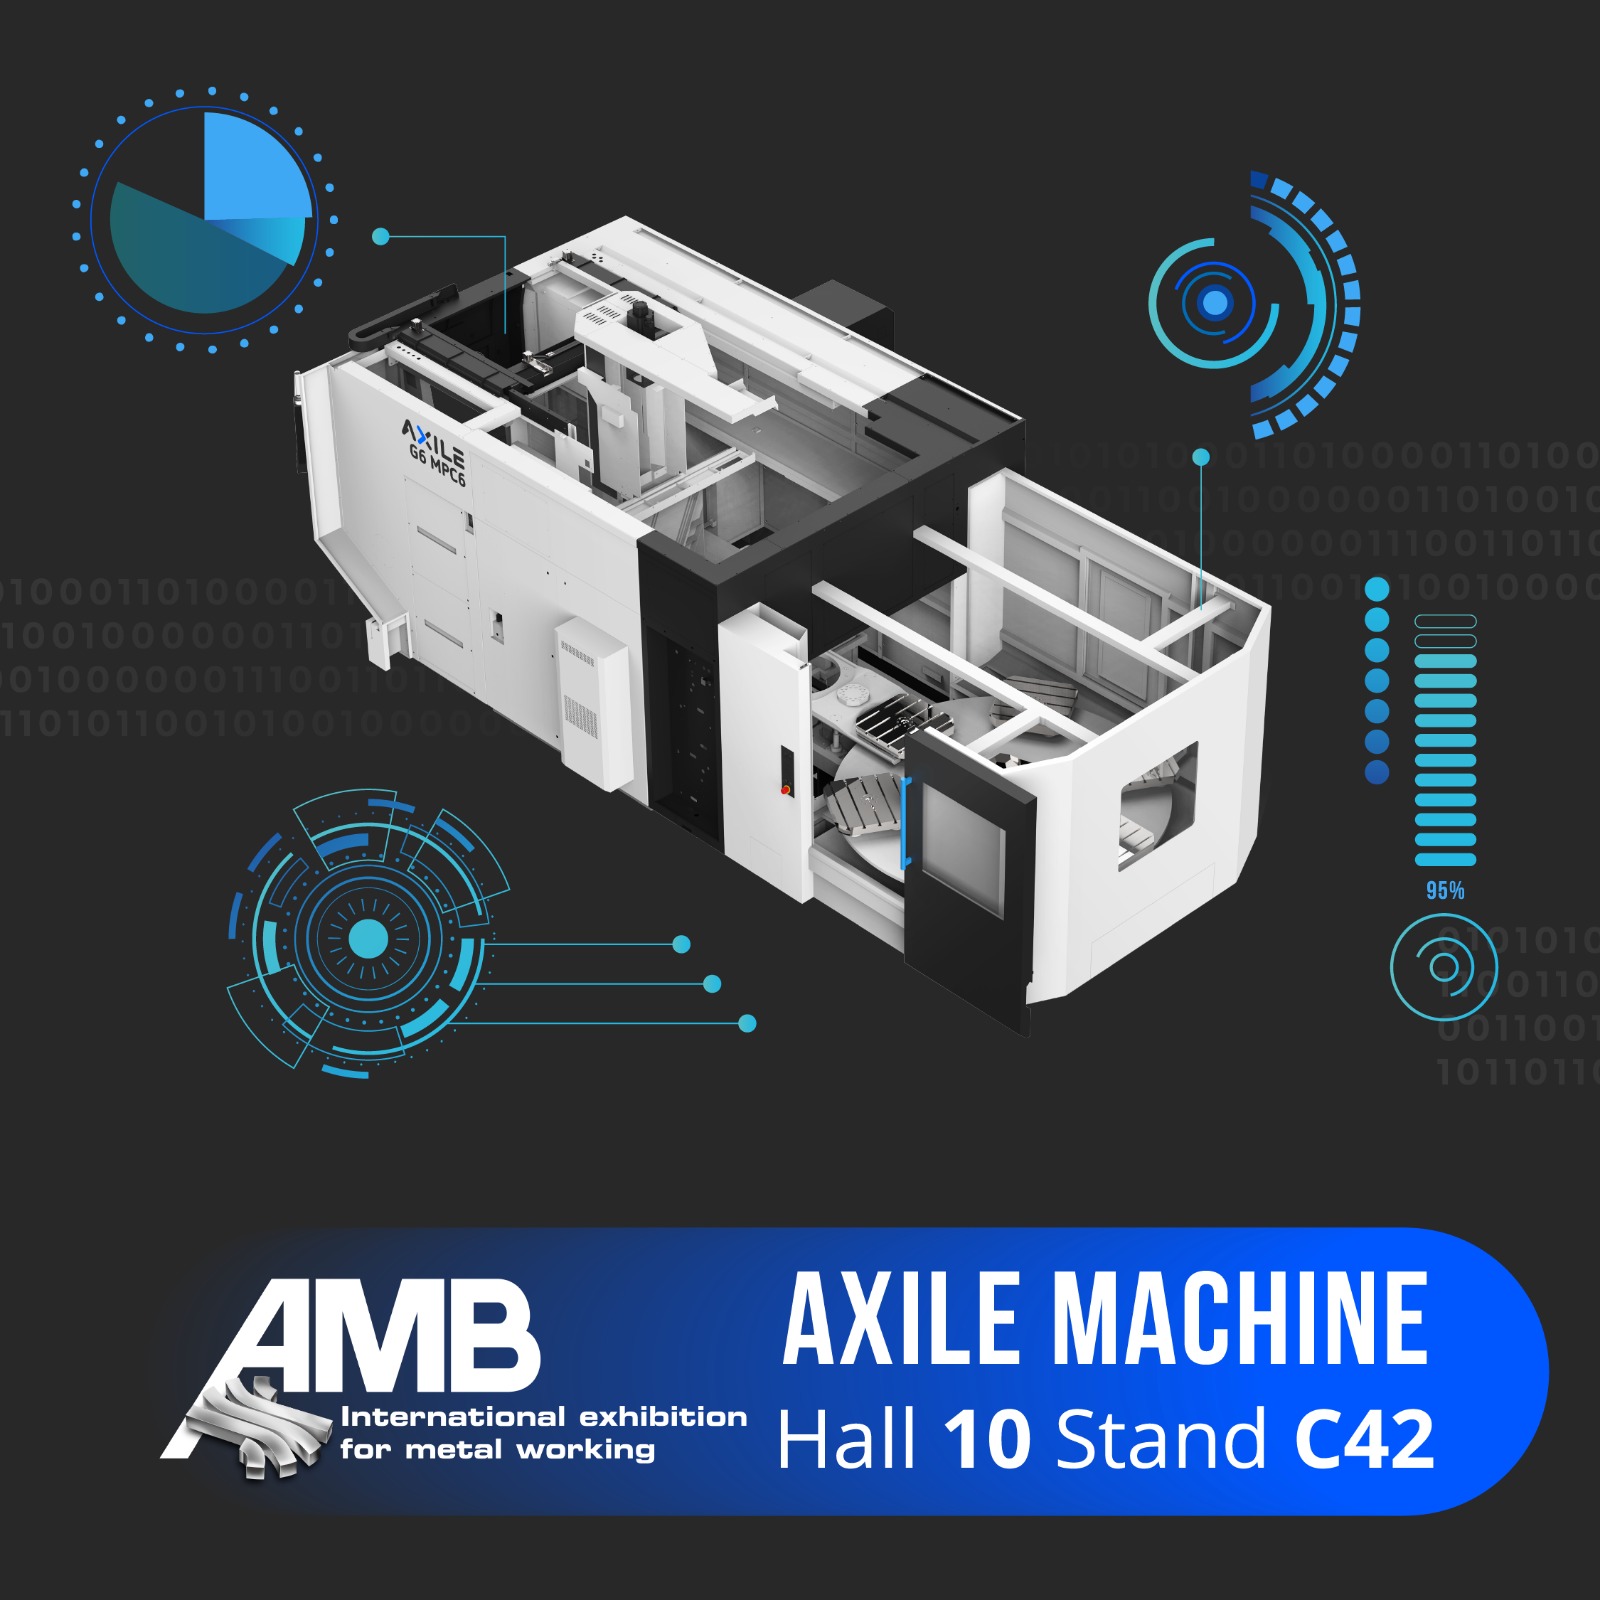 High-speed 5axis VMC with intelligent monitoring technology and management